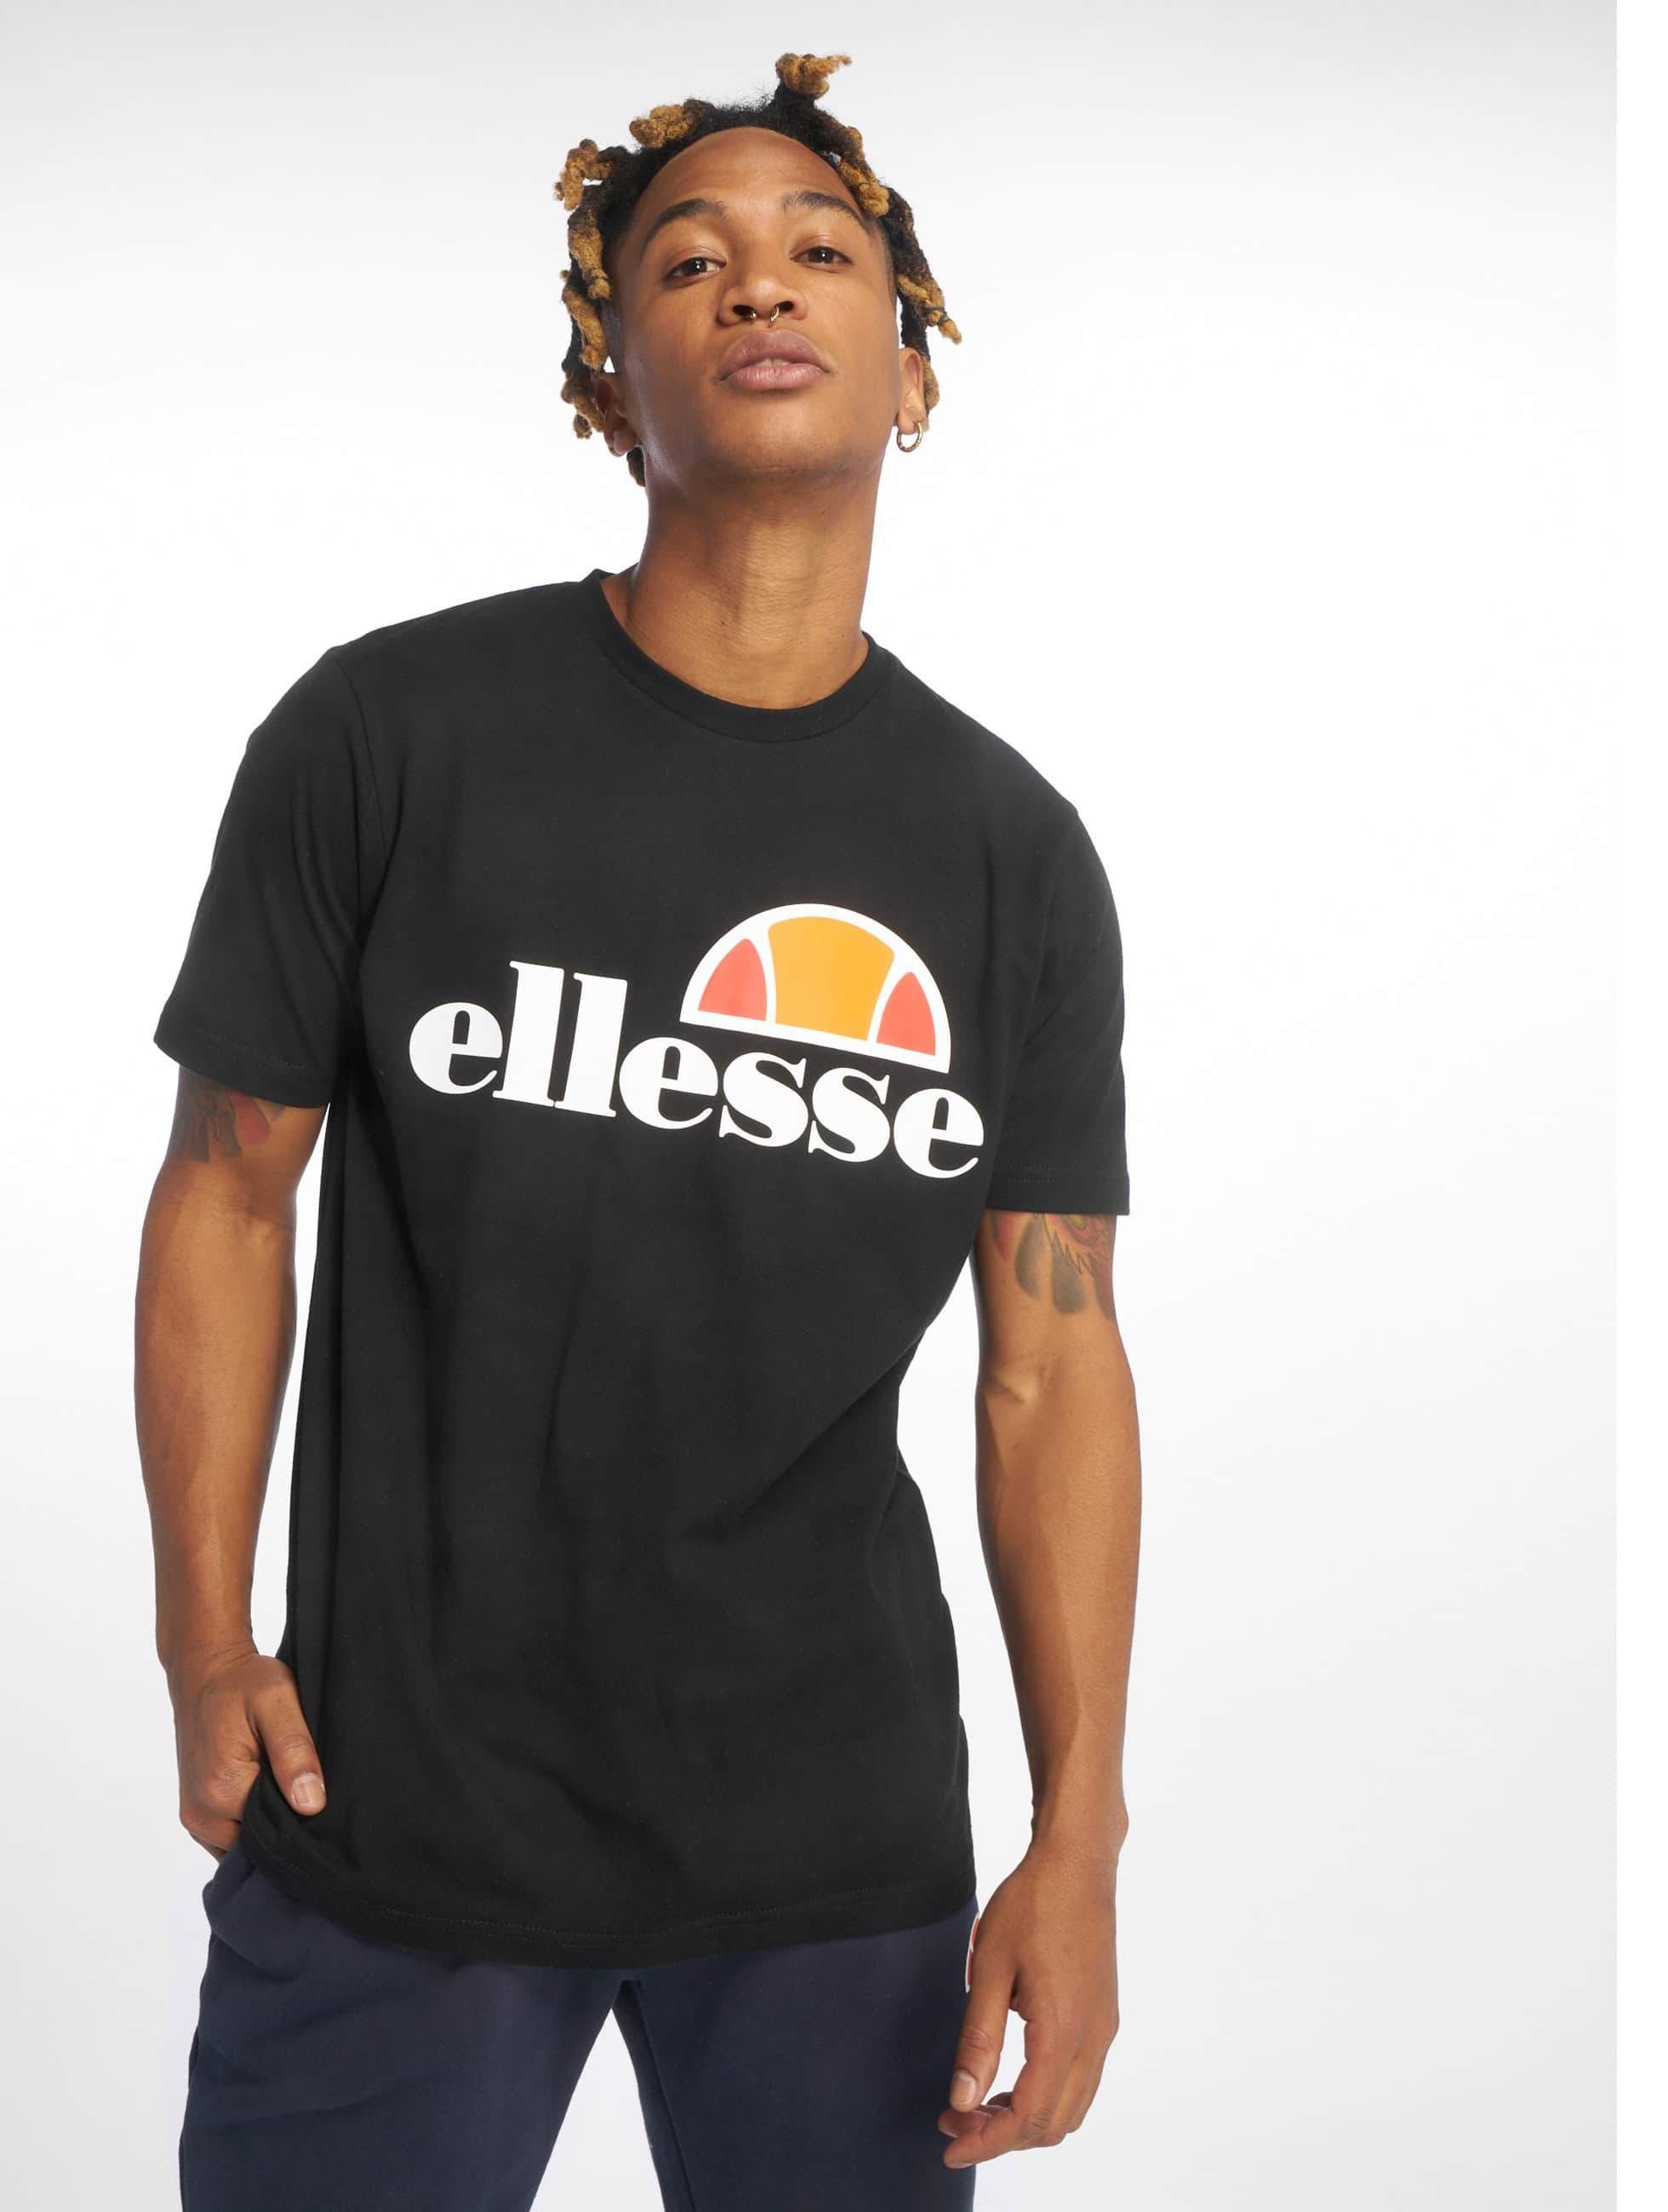 Ellesse t shirt herren gelb july, One piece swimsuits for tall, easy top down sweater pattern free. 